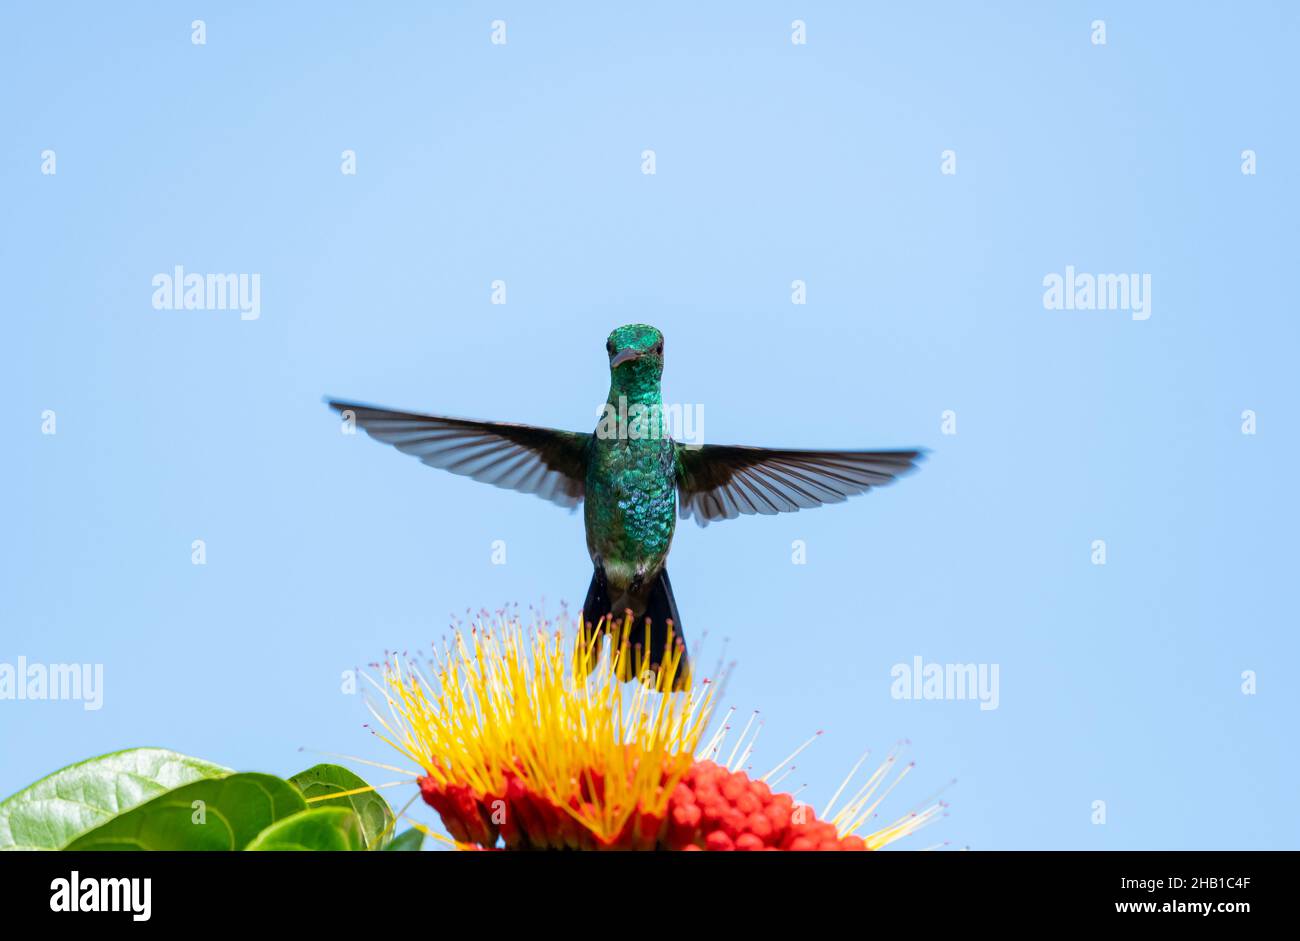 Glittering green Copper-rumped hummingbird hovering above a tropical Combretum flower against the blue sky. Stock Photo